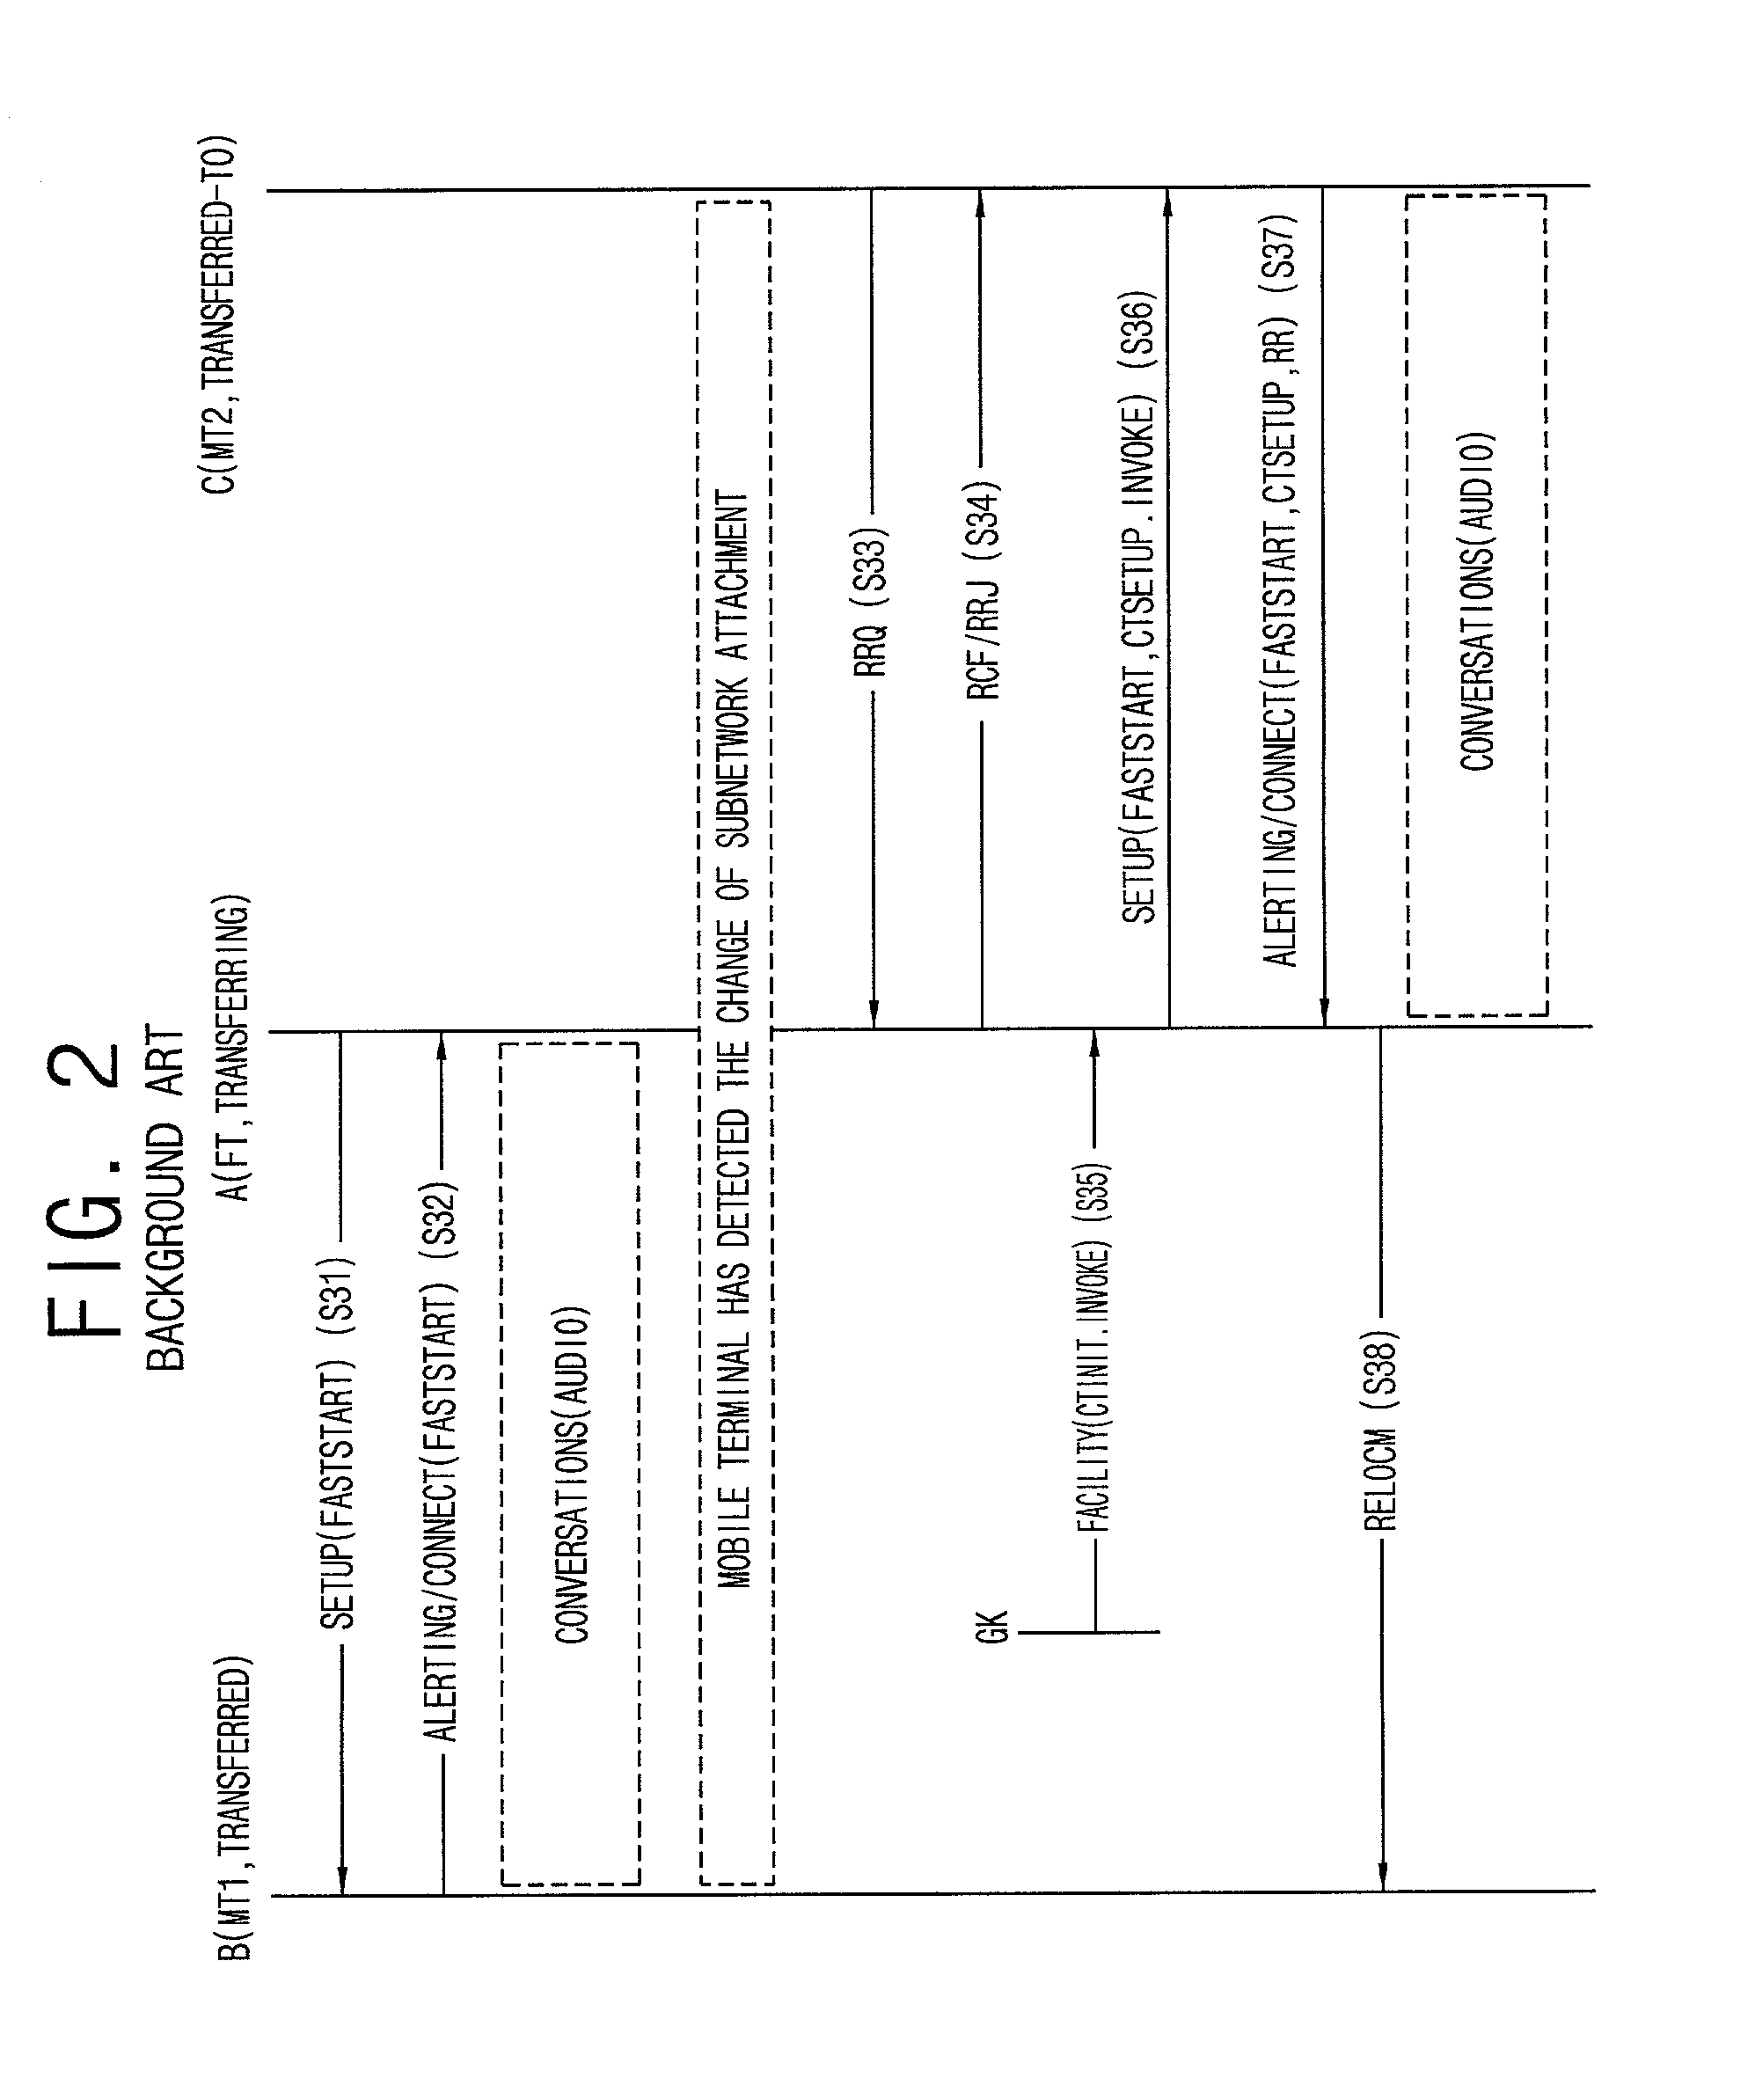 Gatekeeper supporting handoff and handoff method in IP telephony system